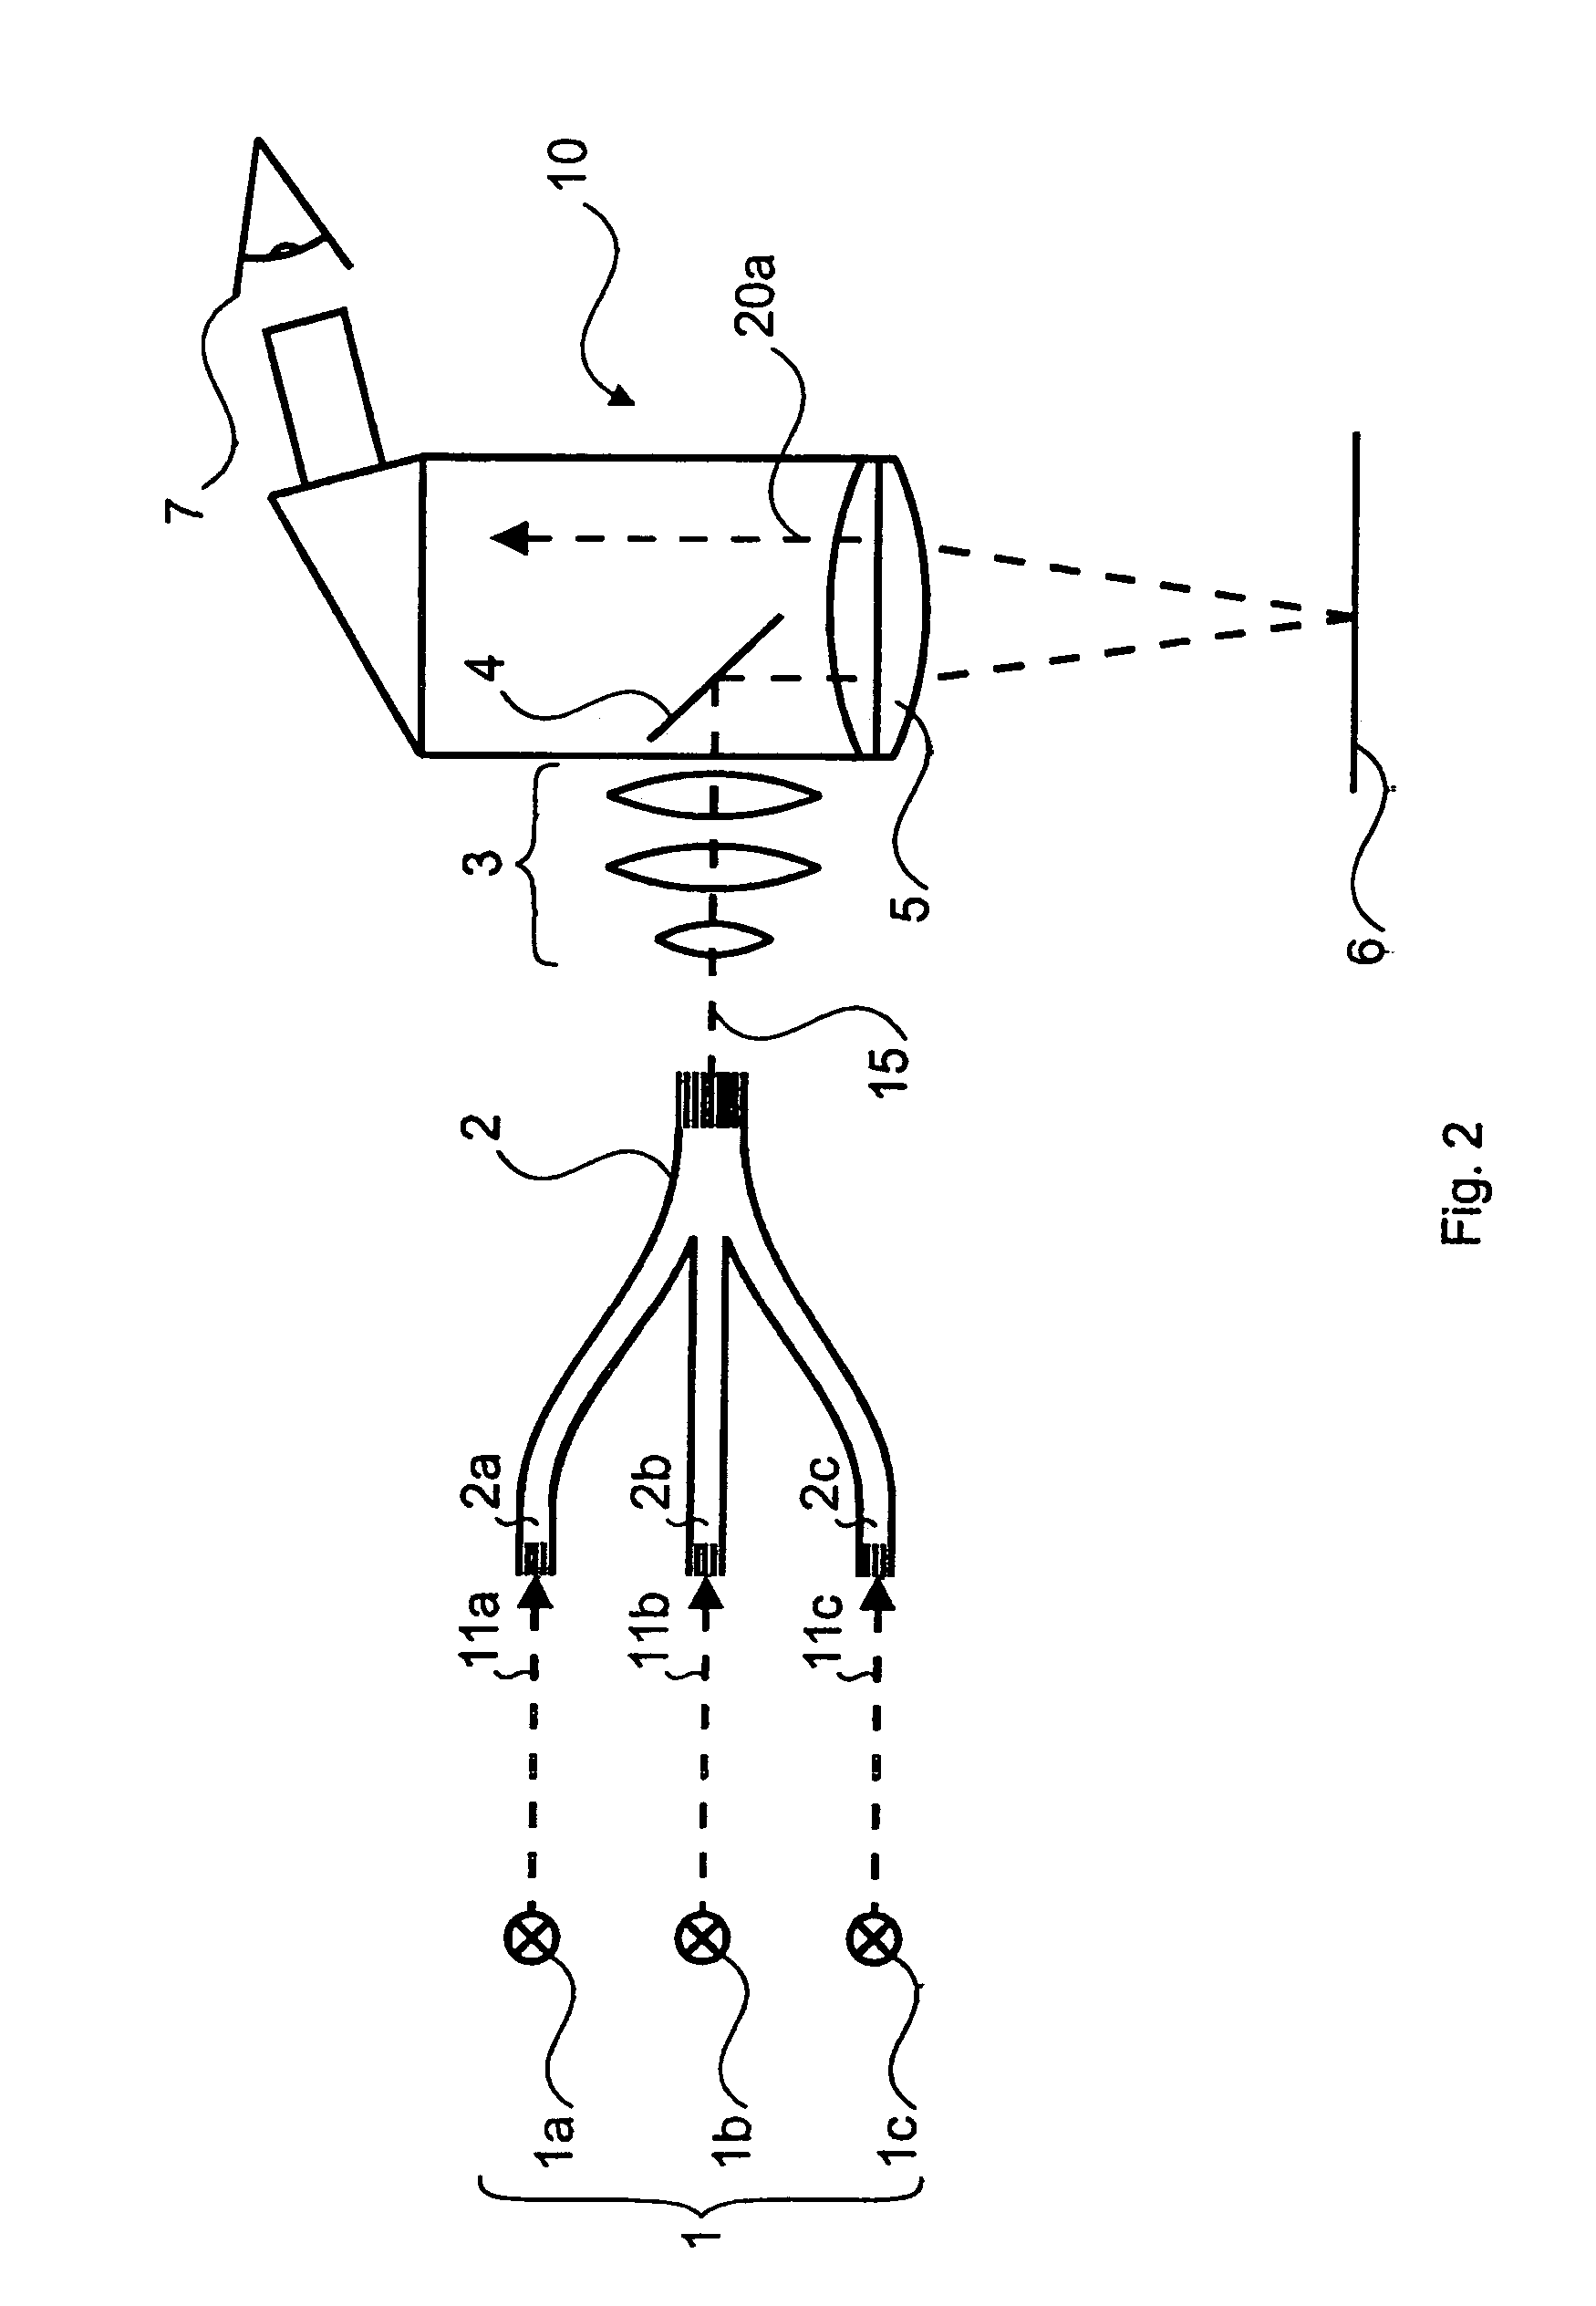 Light-emitting diode illumination system for an optical observation device, in particular a stereomicroscope or stereo surgical microscope